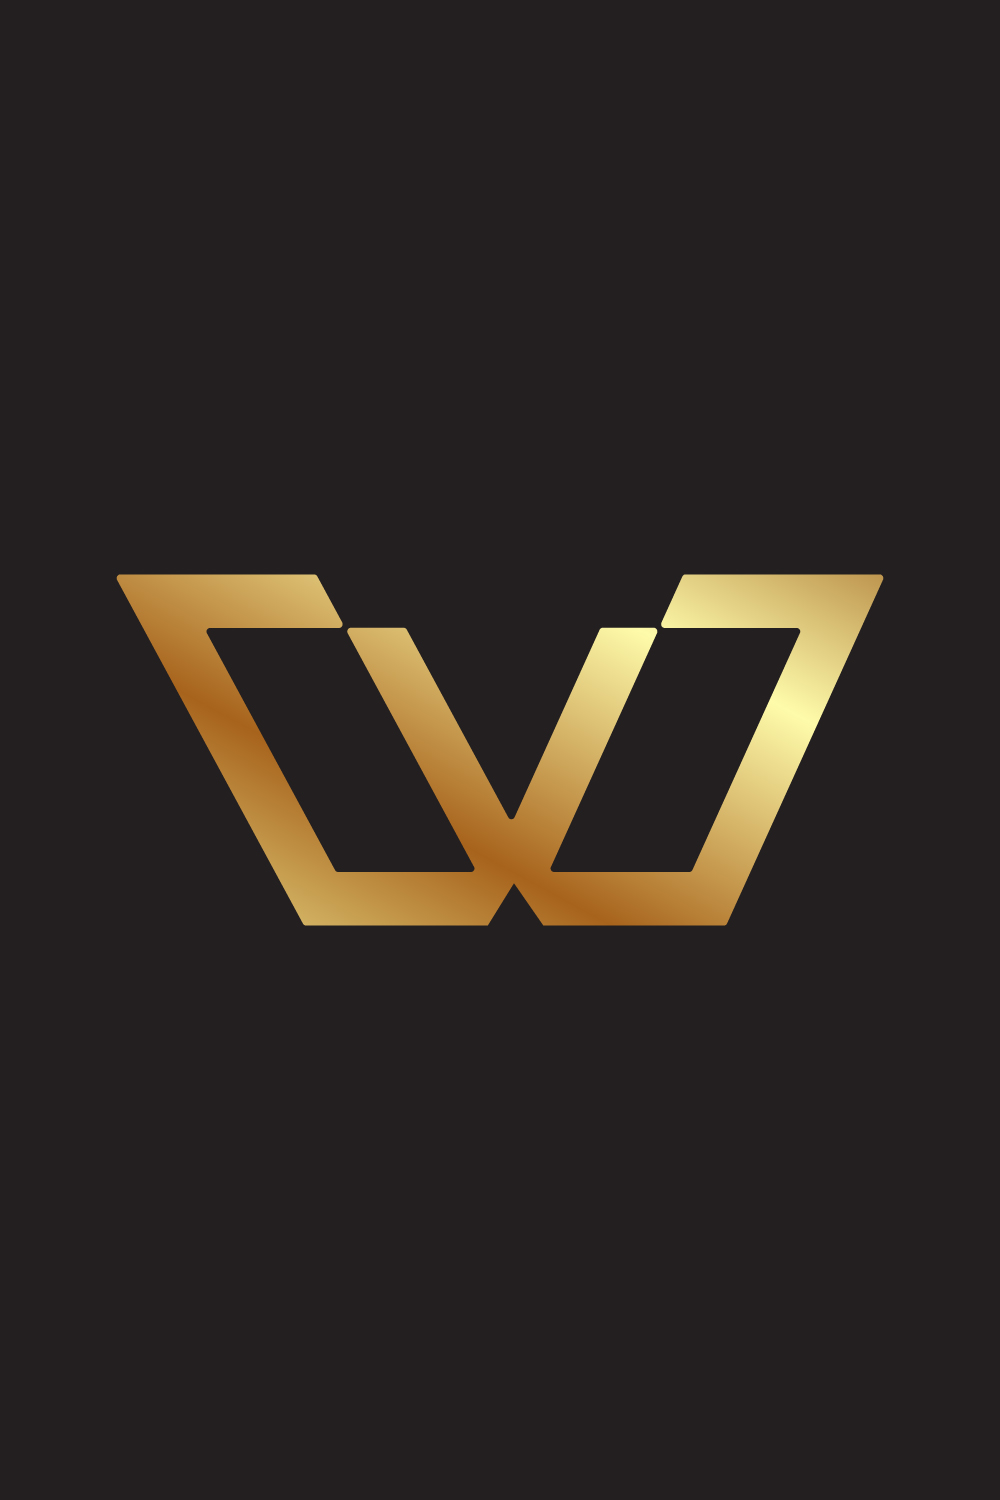 Luxury W letters logo design W golden color gaming logo W logo monogram, template, vector images pinterest preview image.